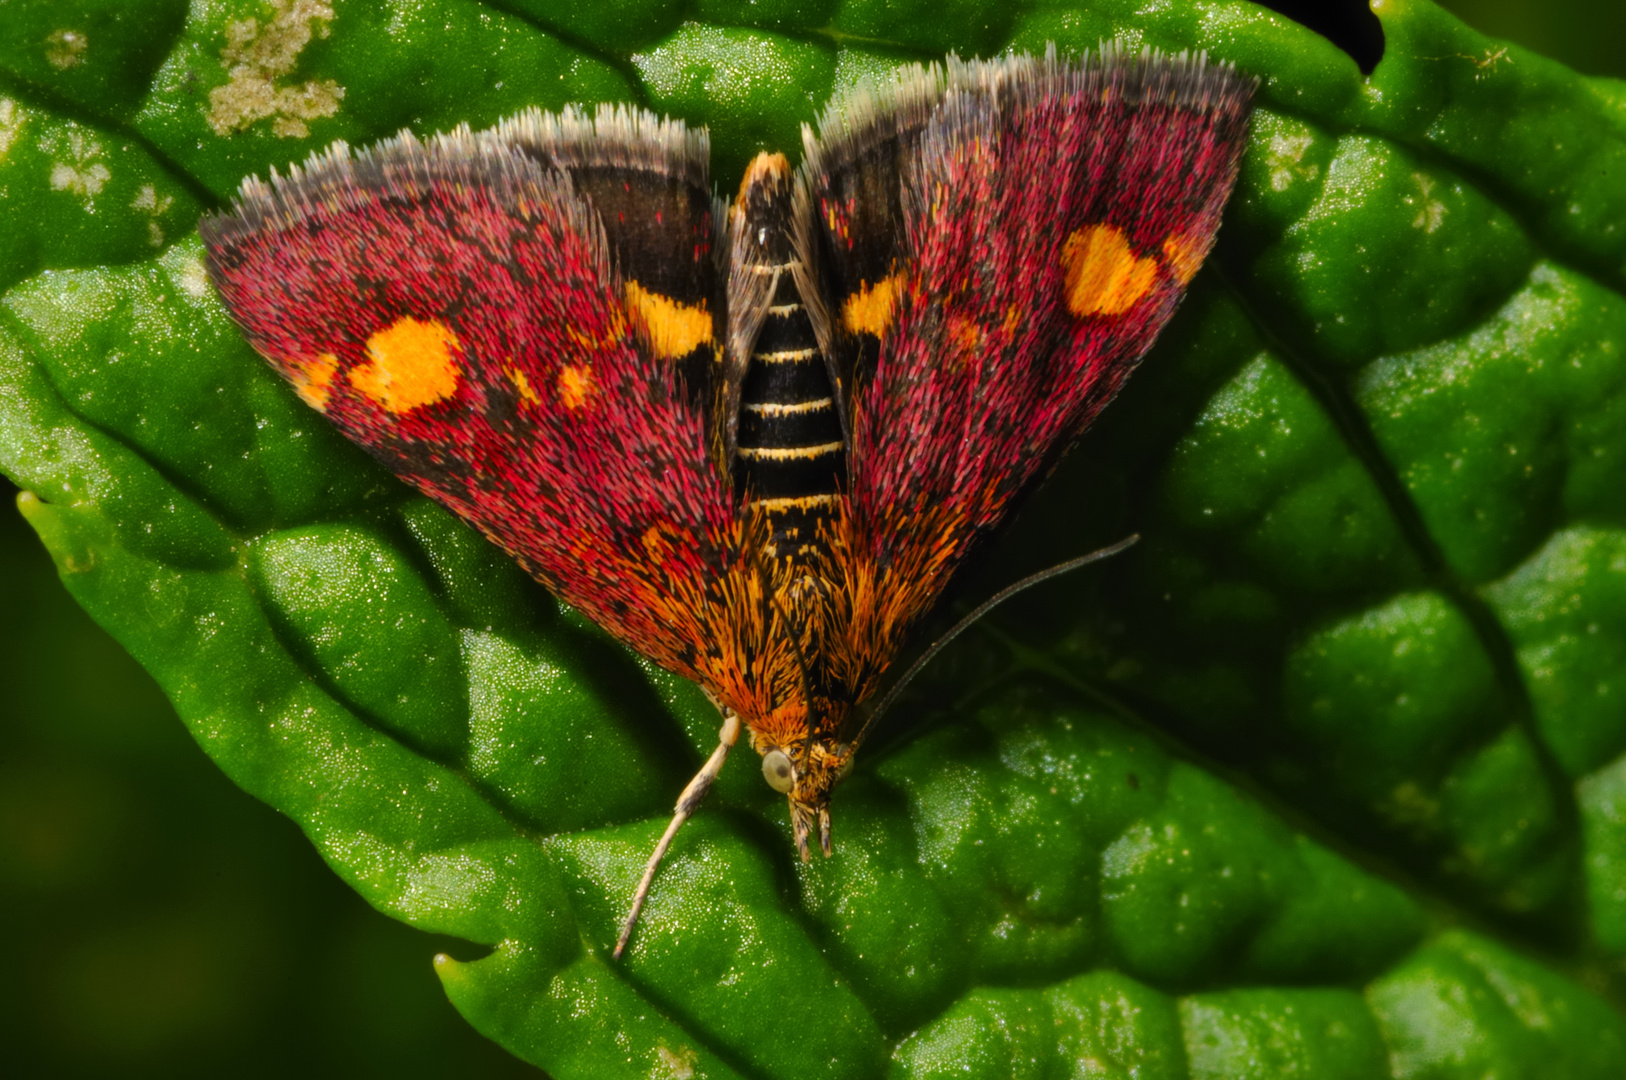 Even moths can be beautiful!